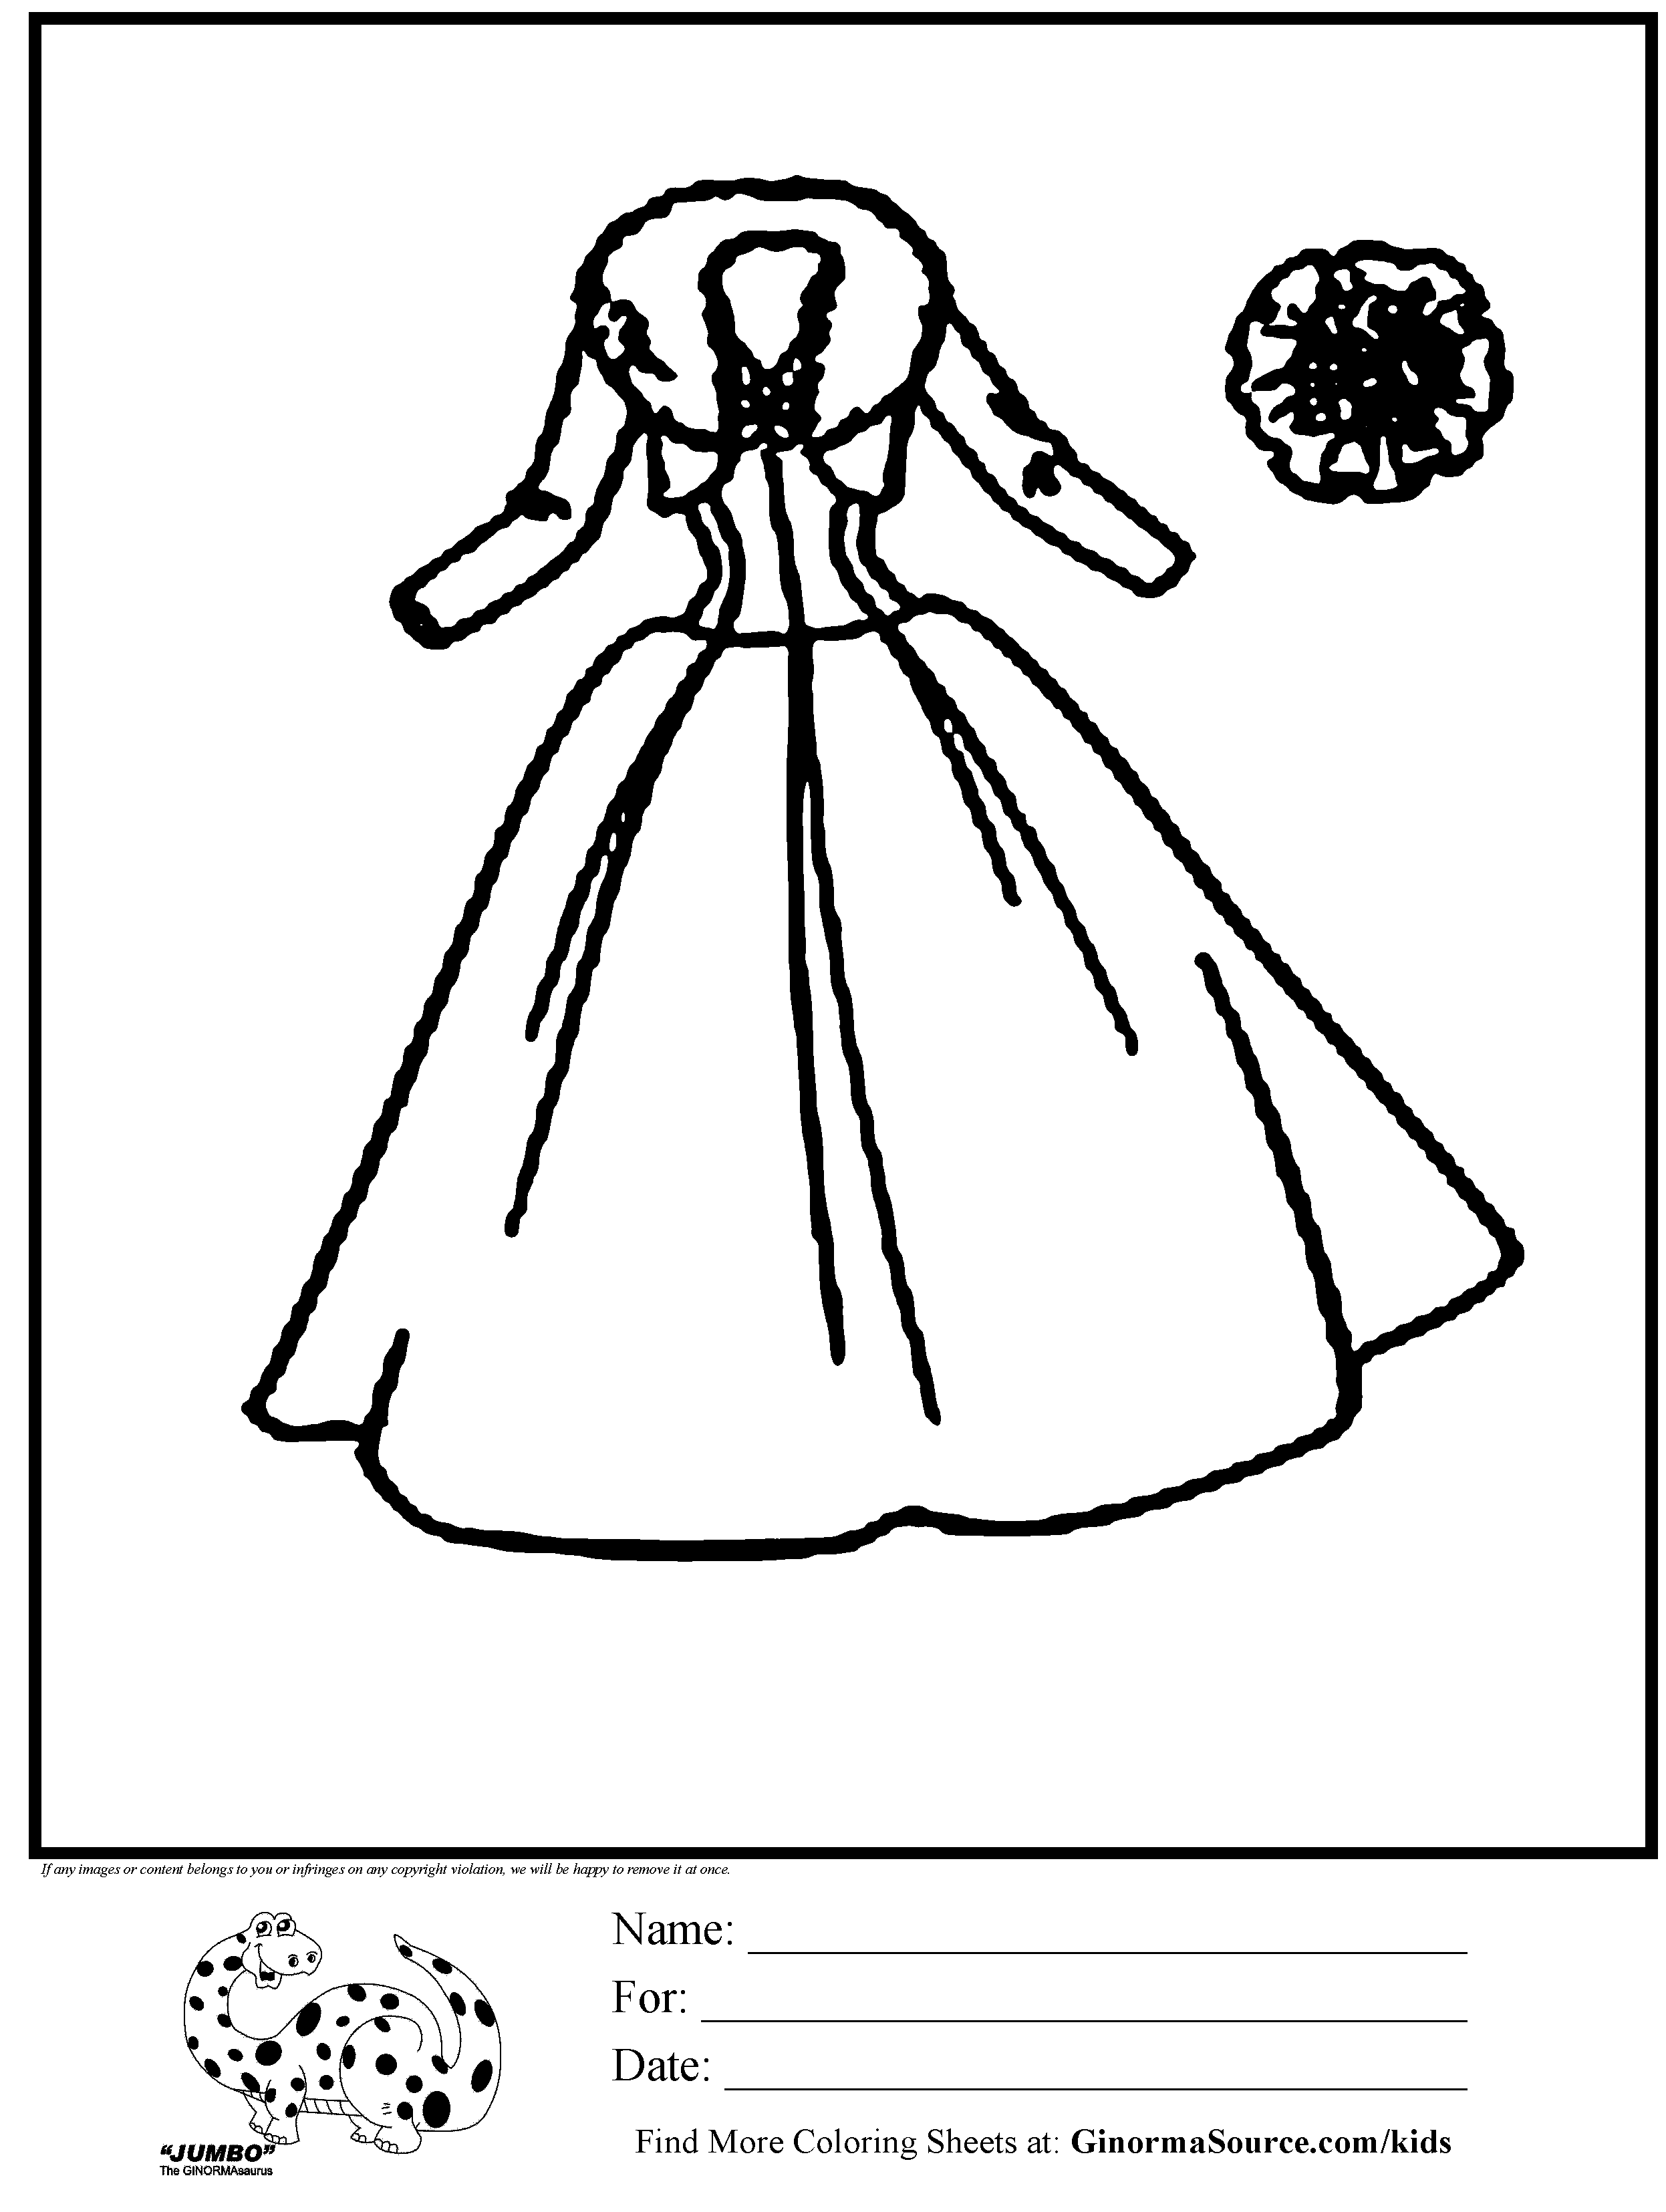 Coloring Pages Dress - Coloring Home